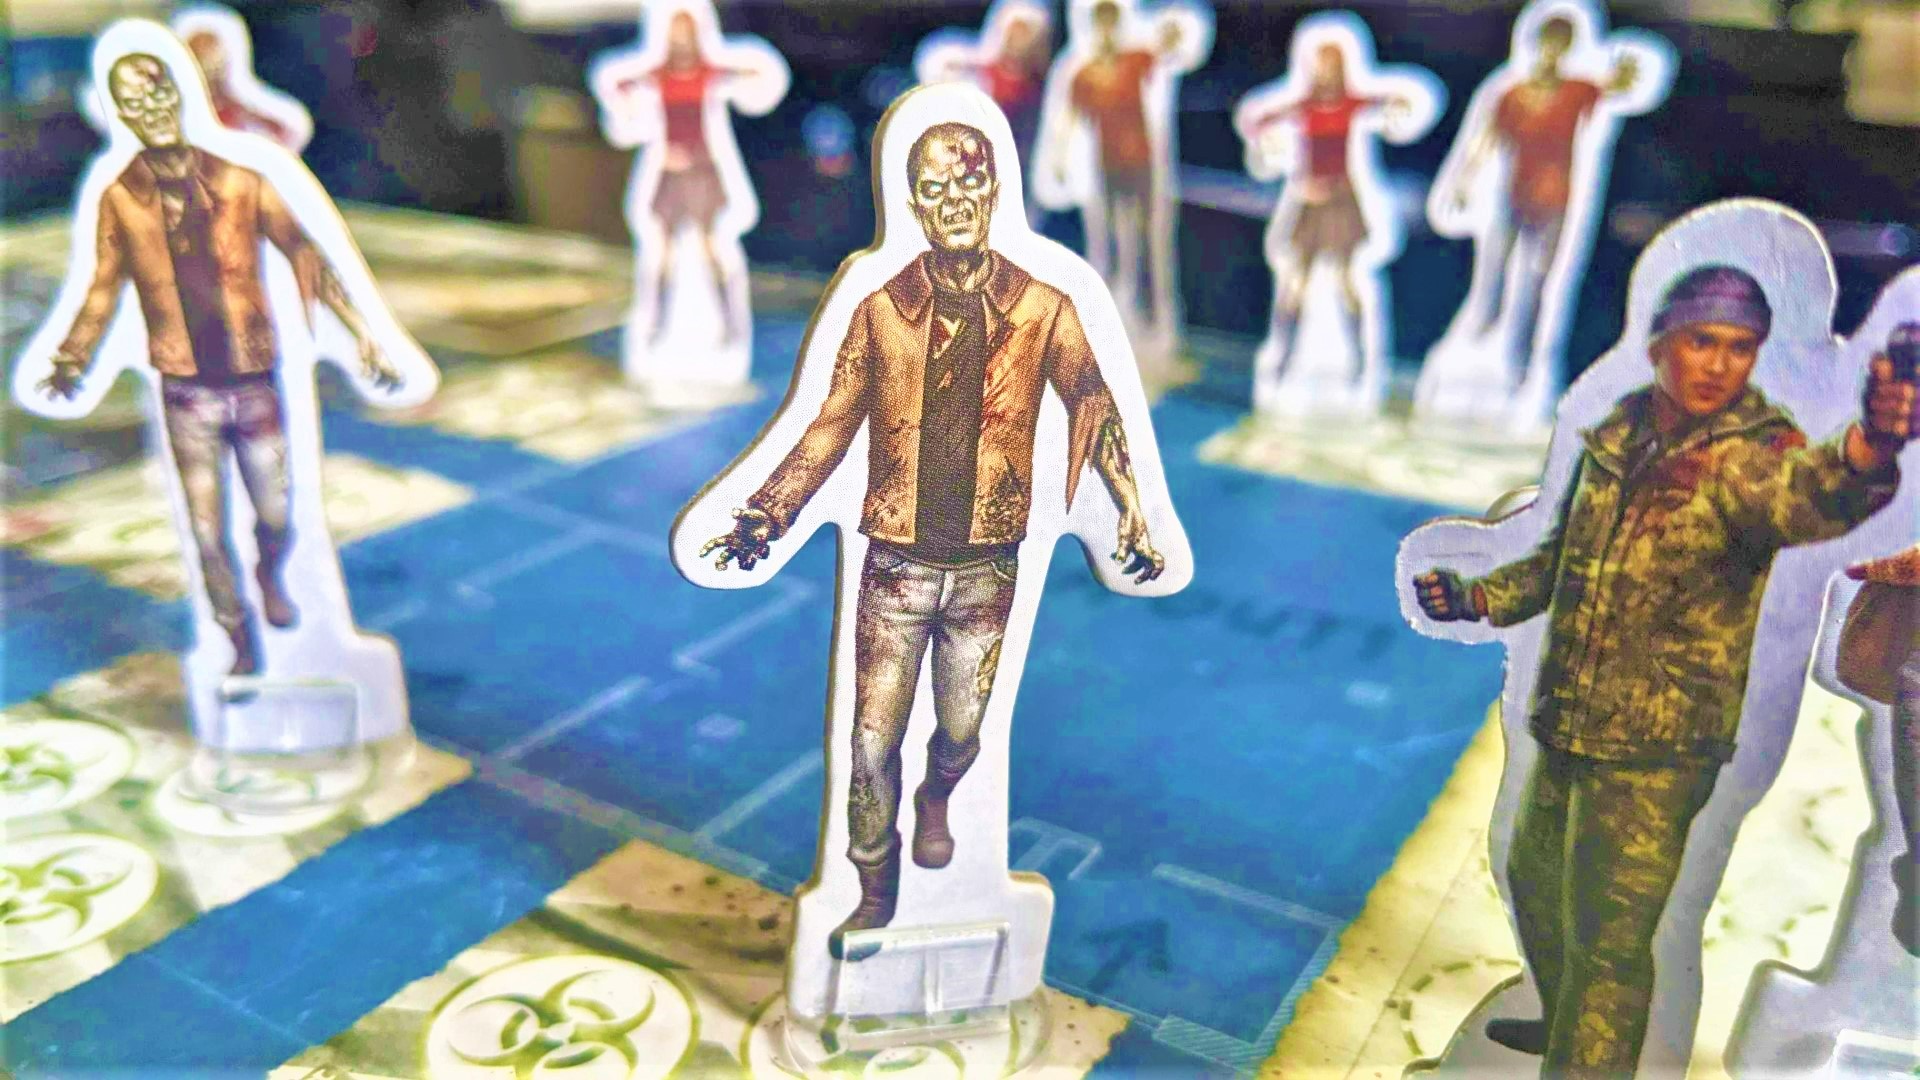 Saboteur, not your typical Solo game but so much fun with house